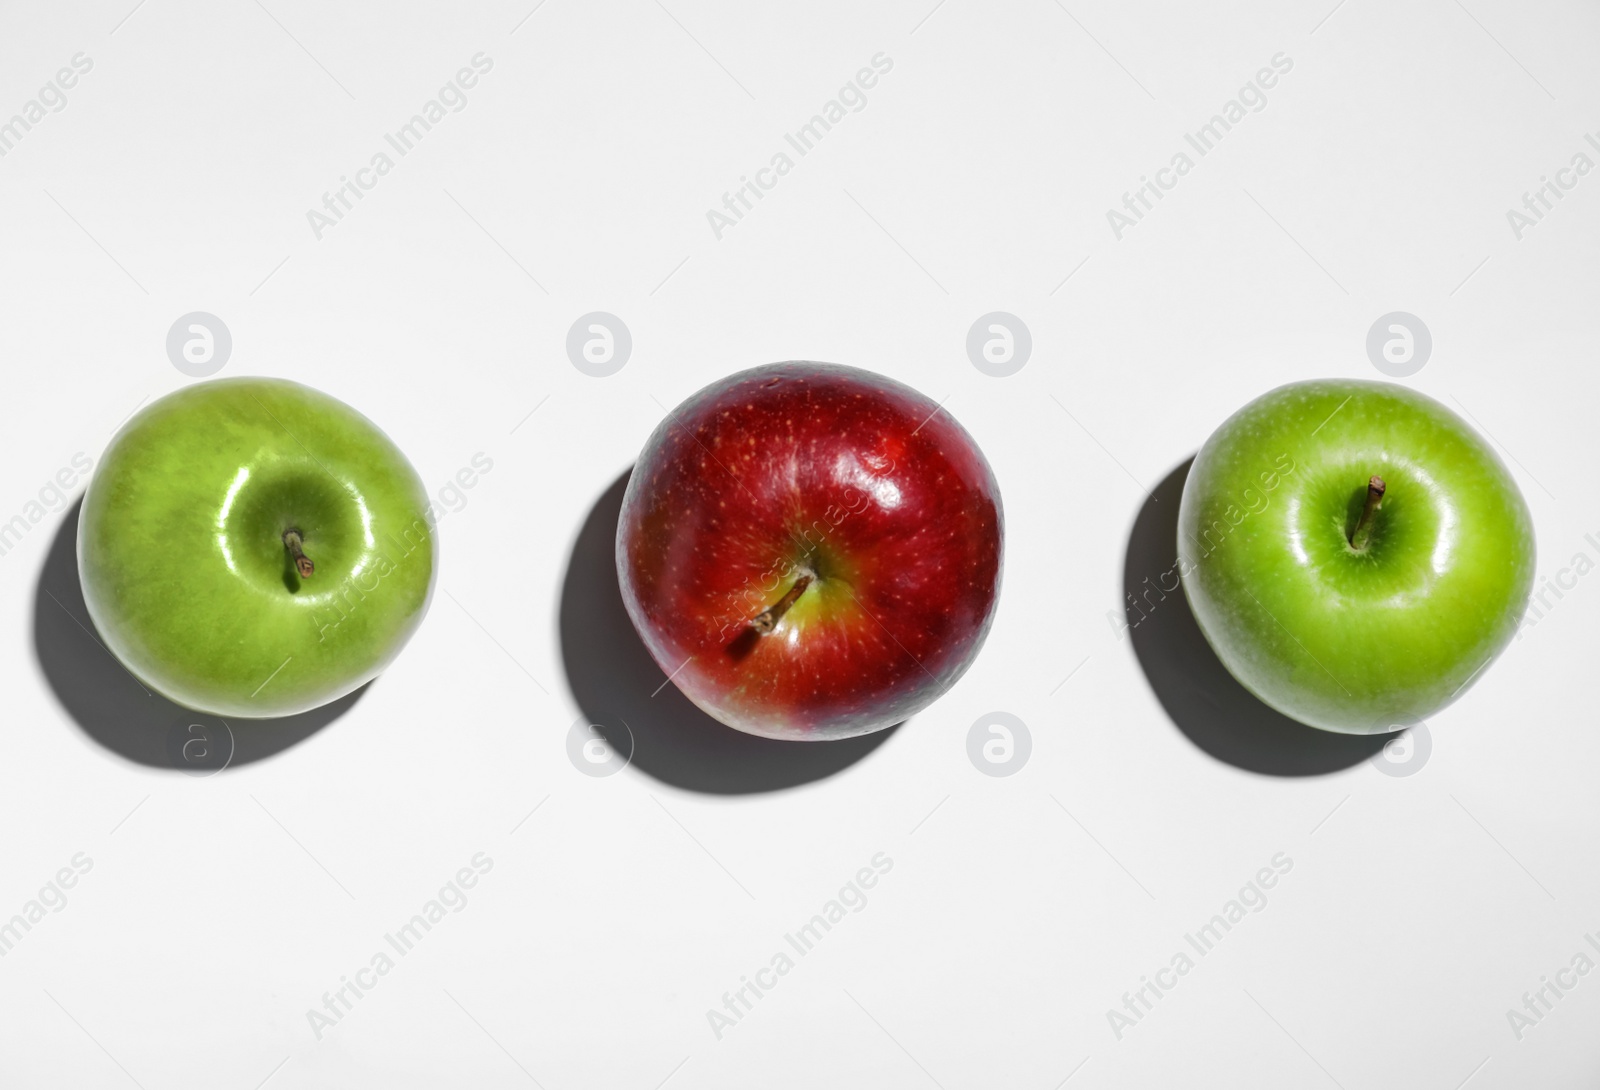 Photo of Ripe red and green apples on white background, top view